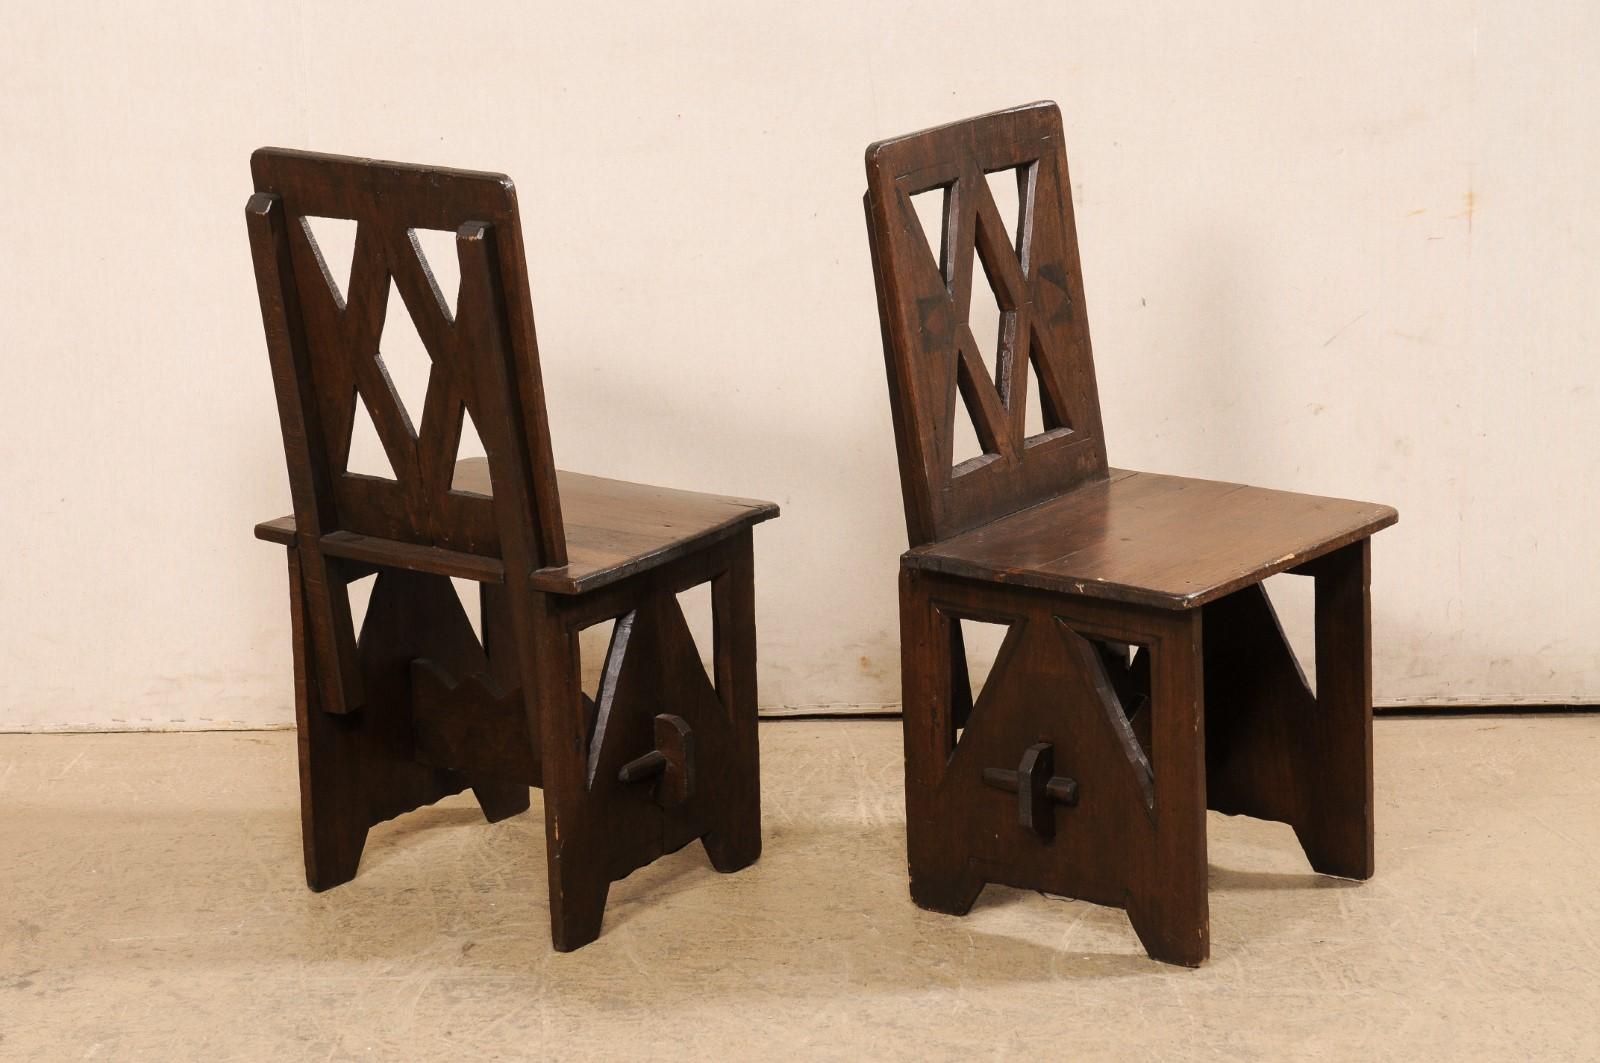 Interesting Pair of Carved Fire-Side Chairs W/Geometric Cut-Outs, N. Africa 1